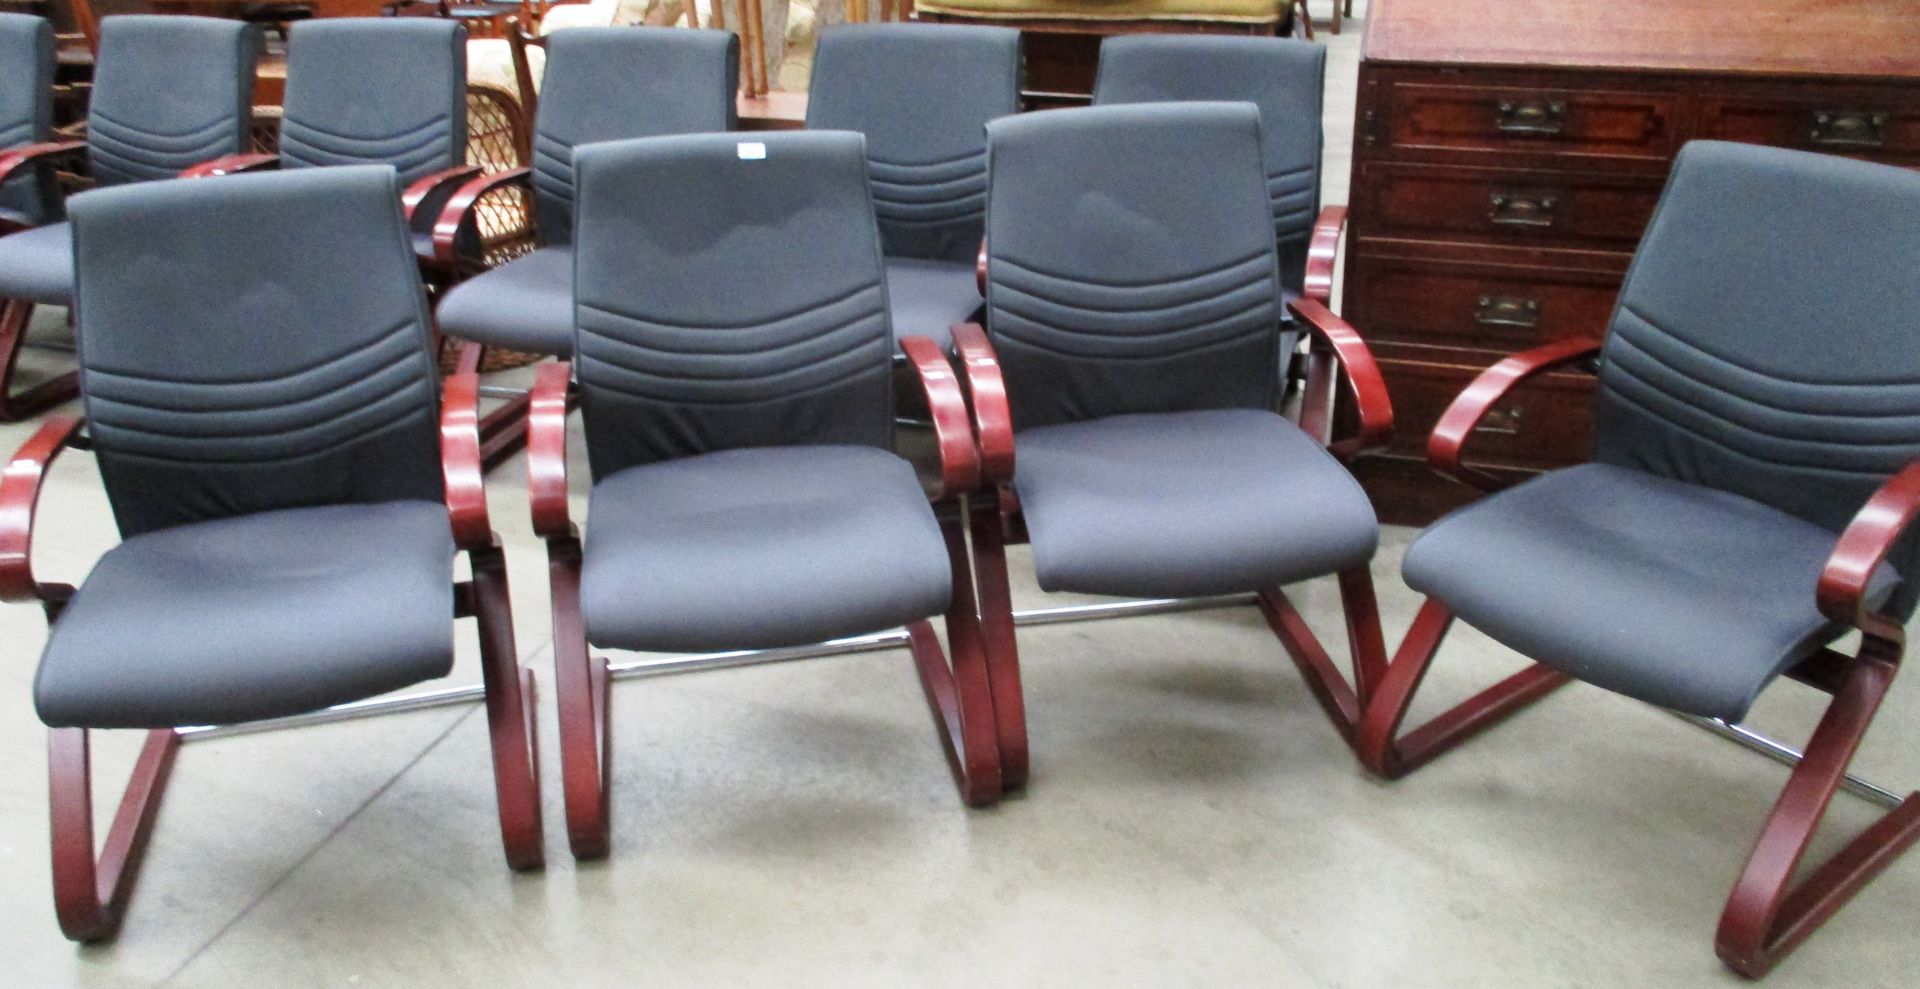 A set of four boardroom armchairs with rosewood stained arms and a mid grey upholstered seats and